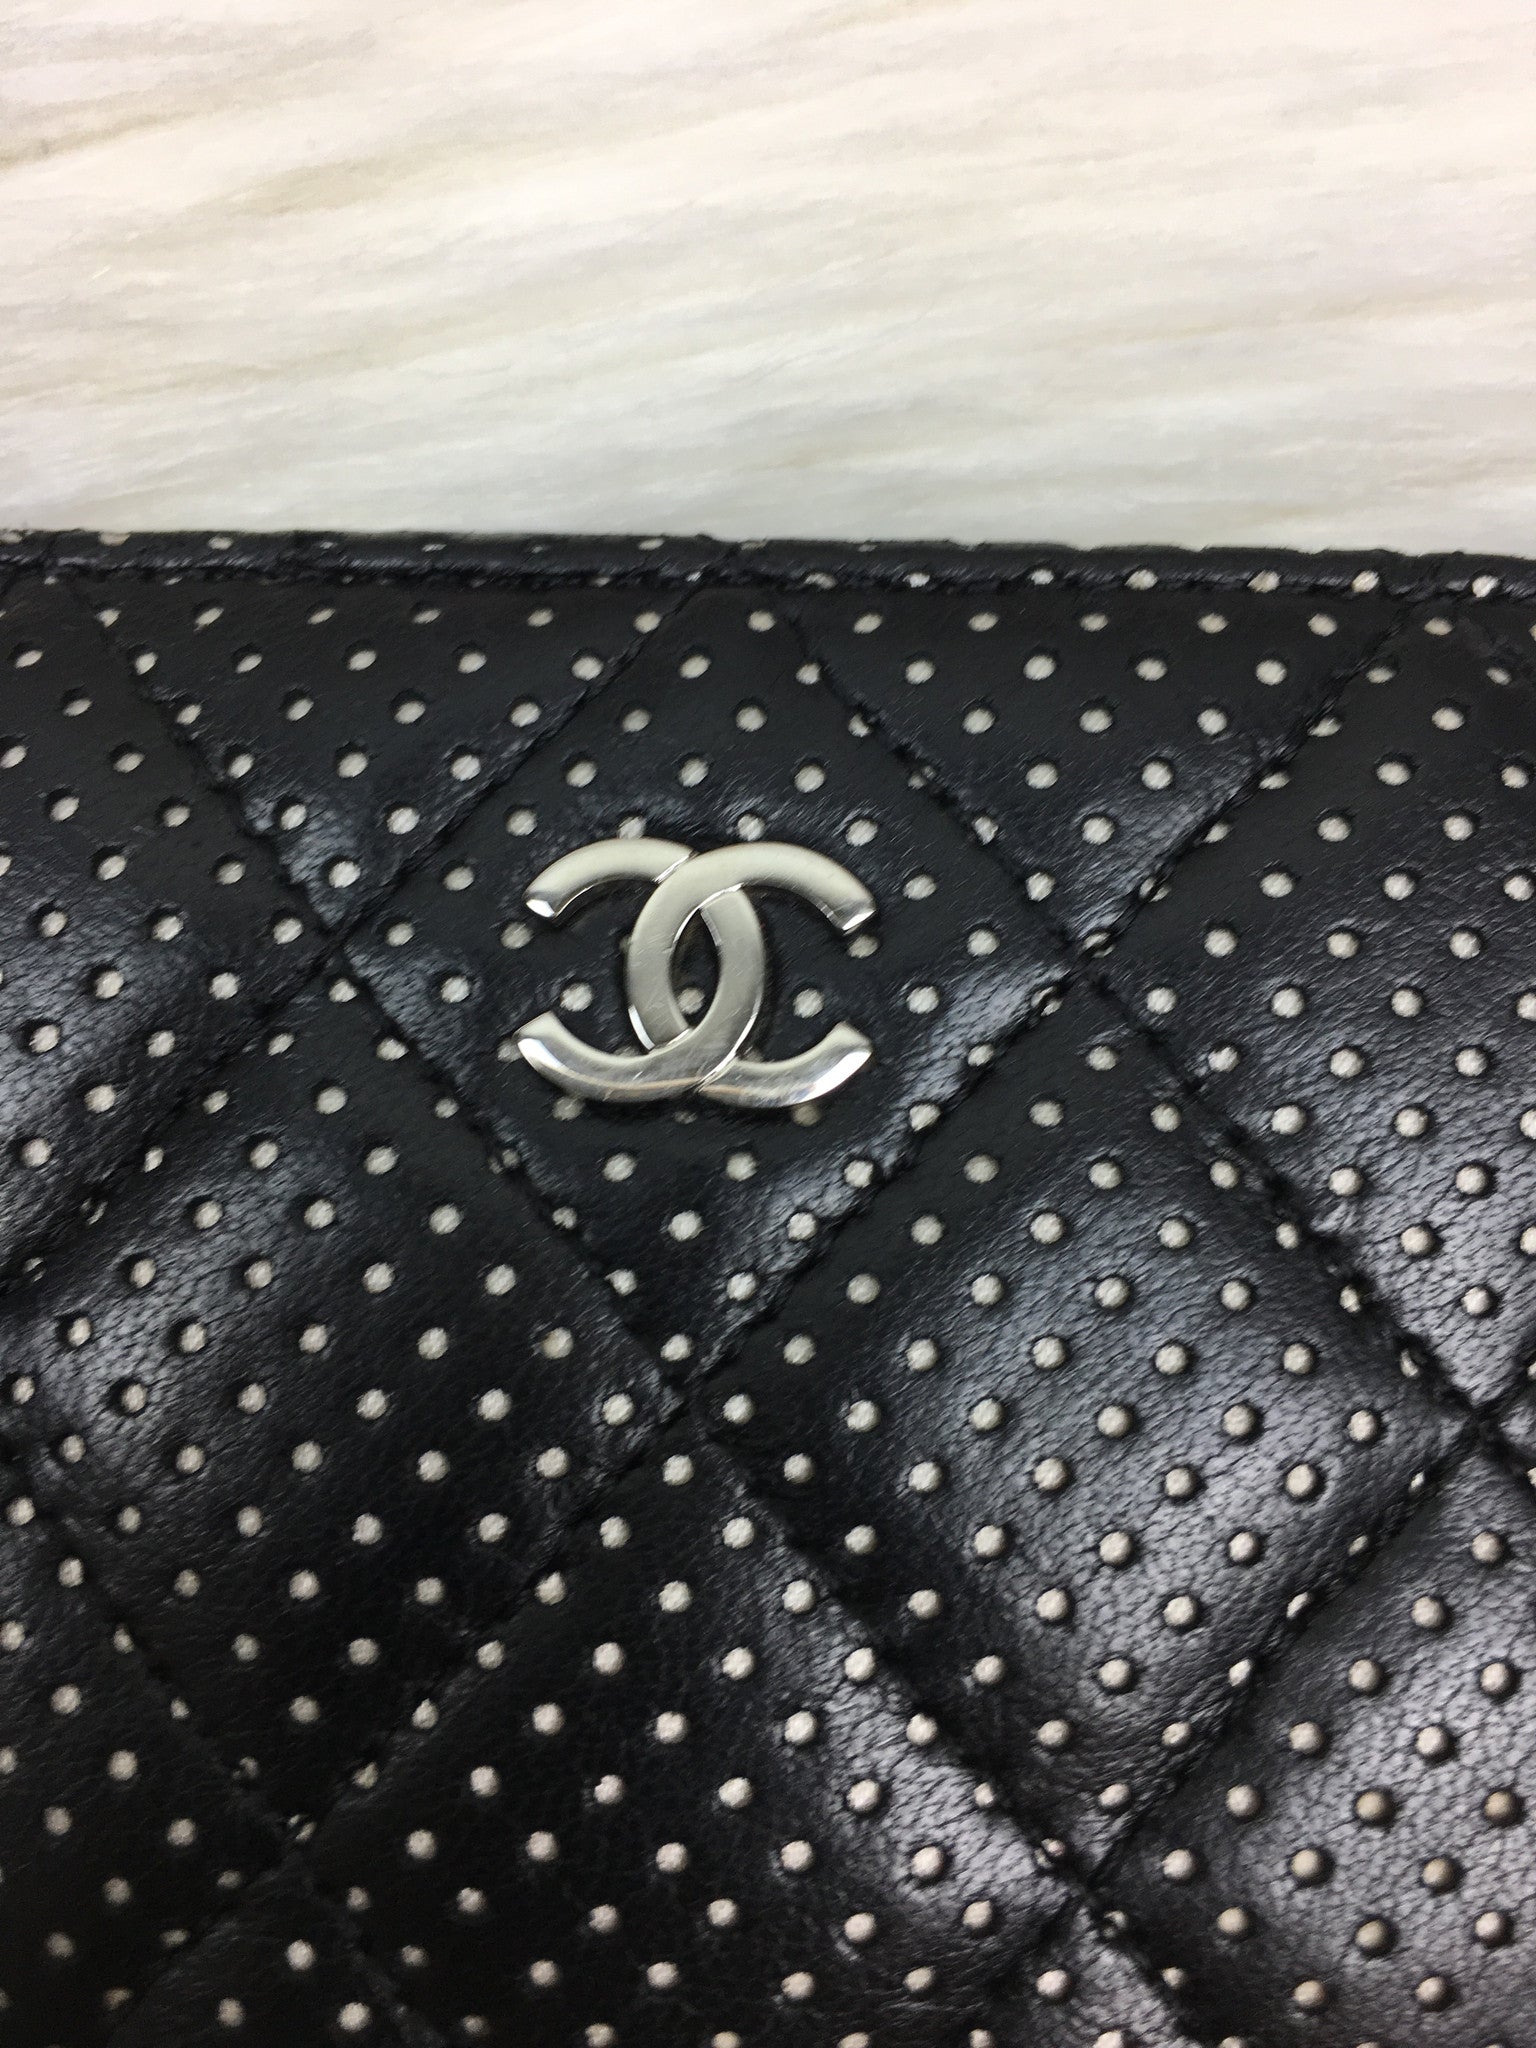 CHANEL Lambskin Perforated Black/White Wallet